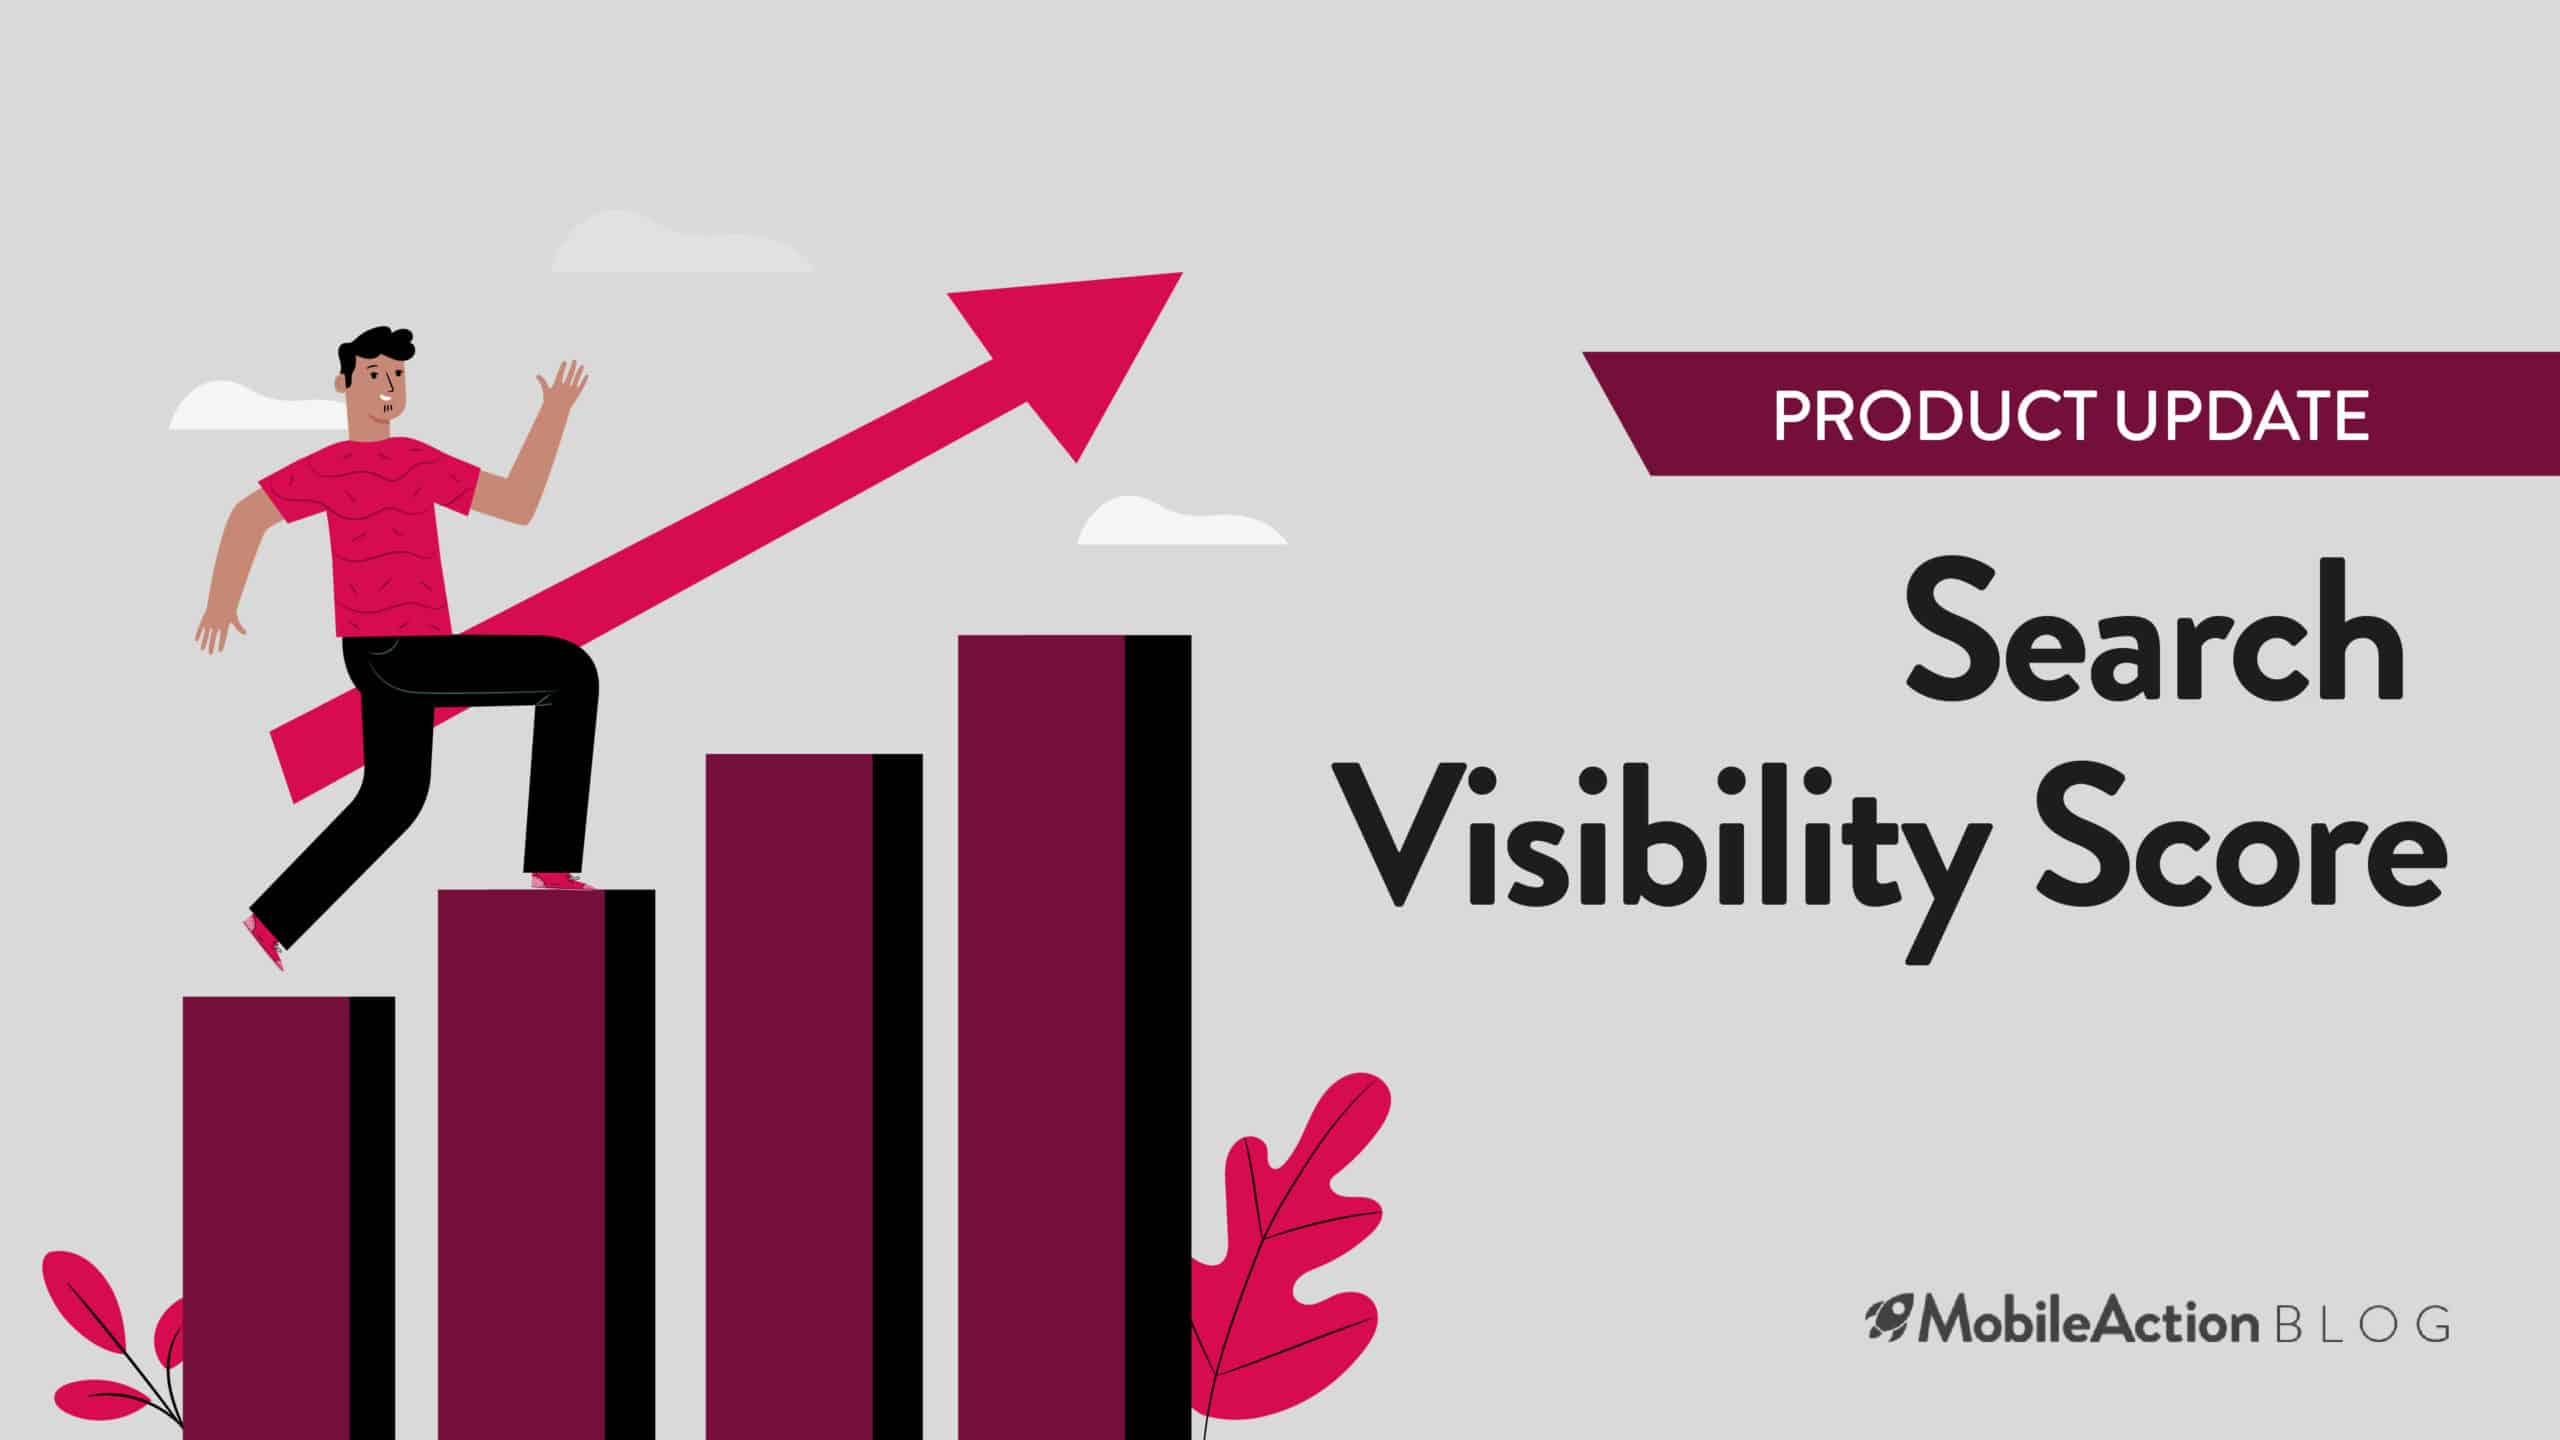 Uncover Your App’s Visibility with the New Search Visibility Score